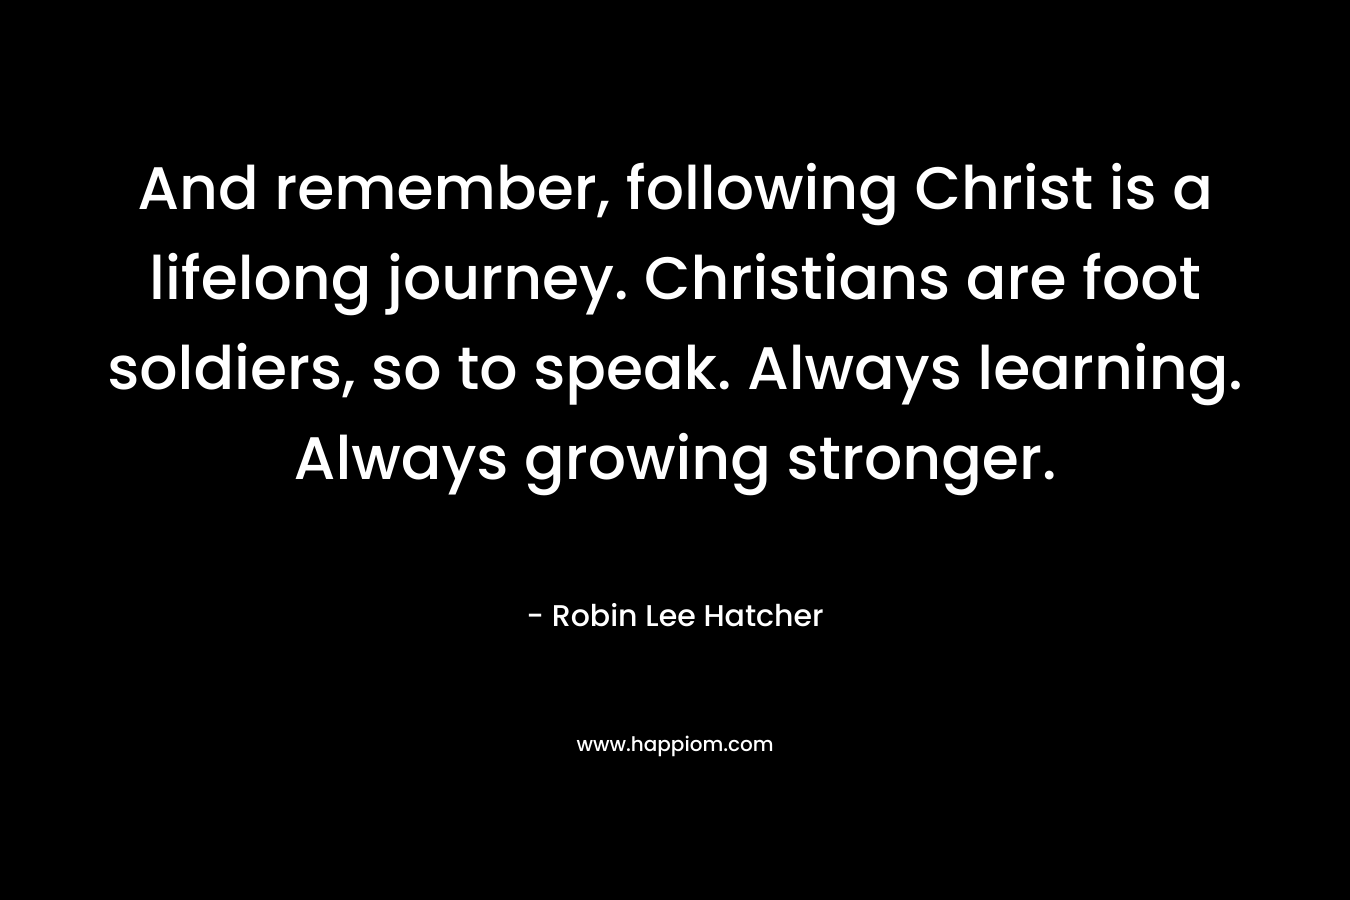 And remember, following Christ is a lifelong journey. Christians are foot soldiers, so to speak. Always learning. Always growing stronger. – Robin Lee Hatcher